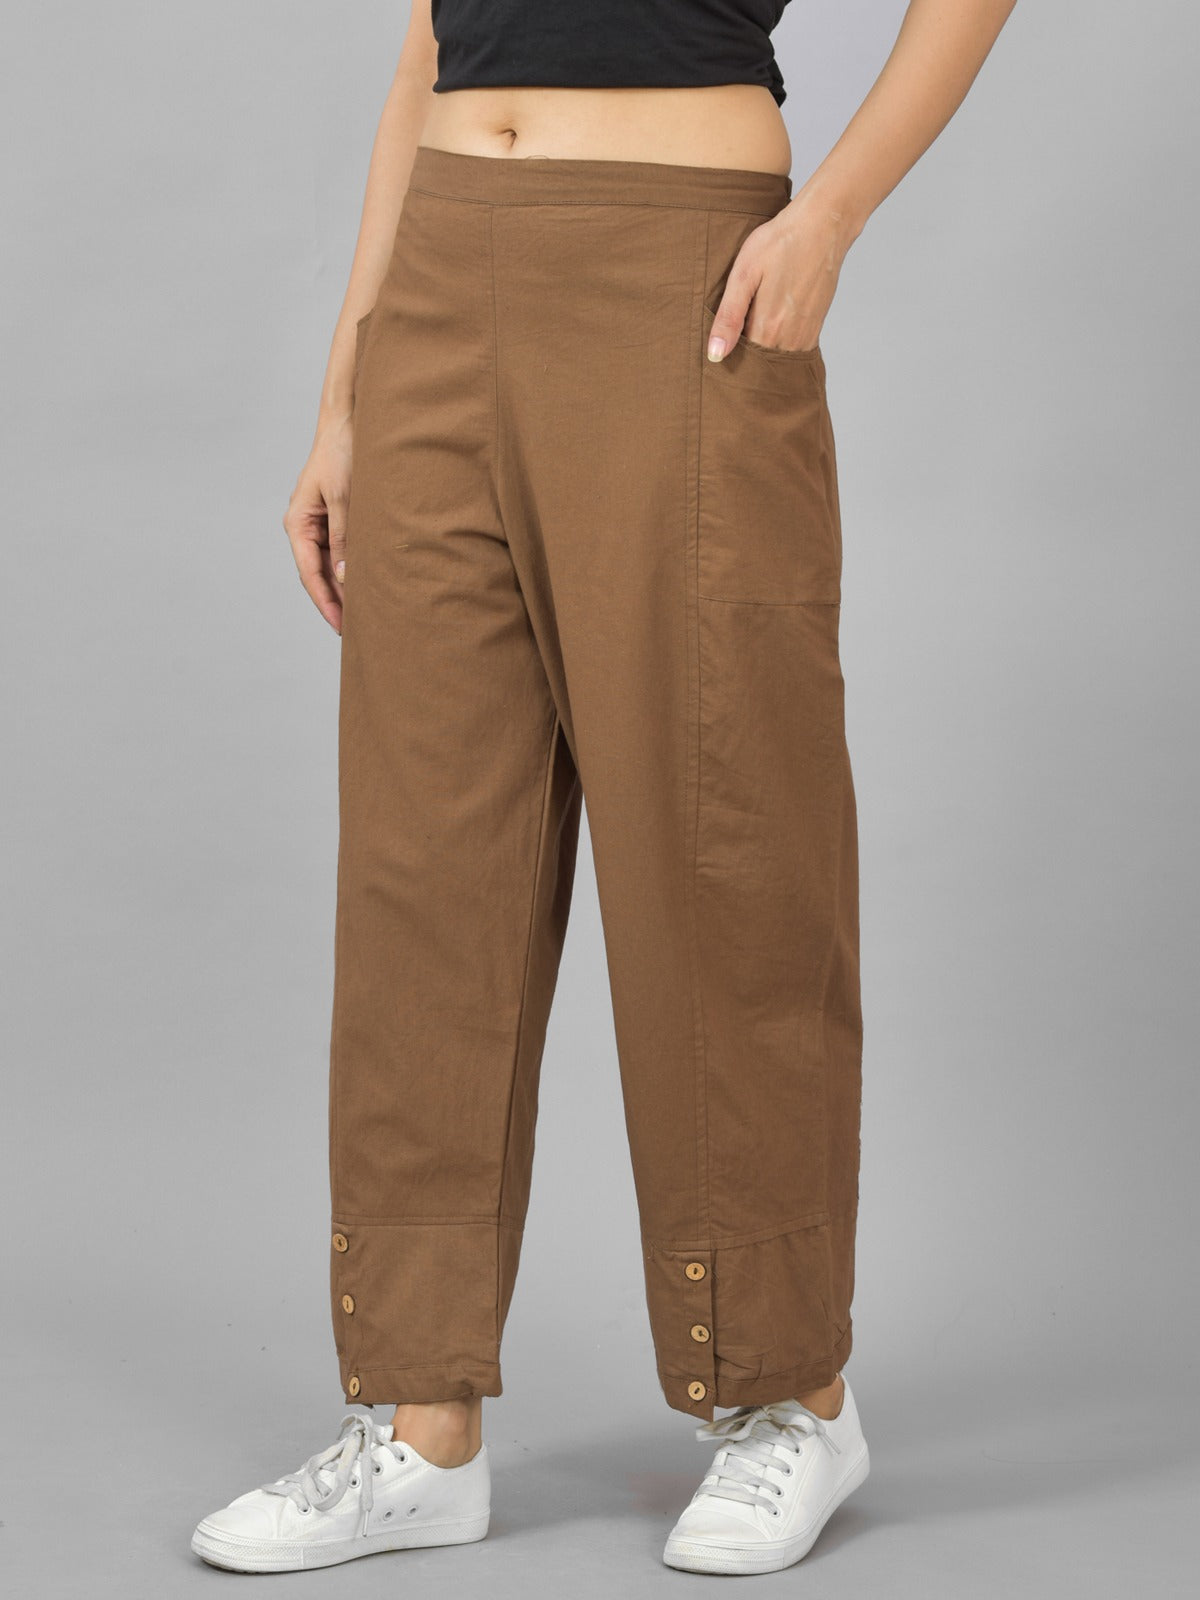 Combo Pack Of Womens White And Brown Side Pocket Straight Cargo Pants